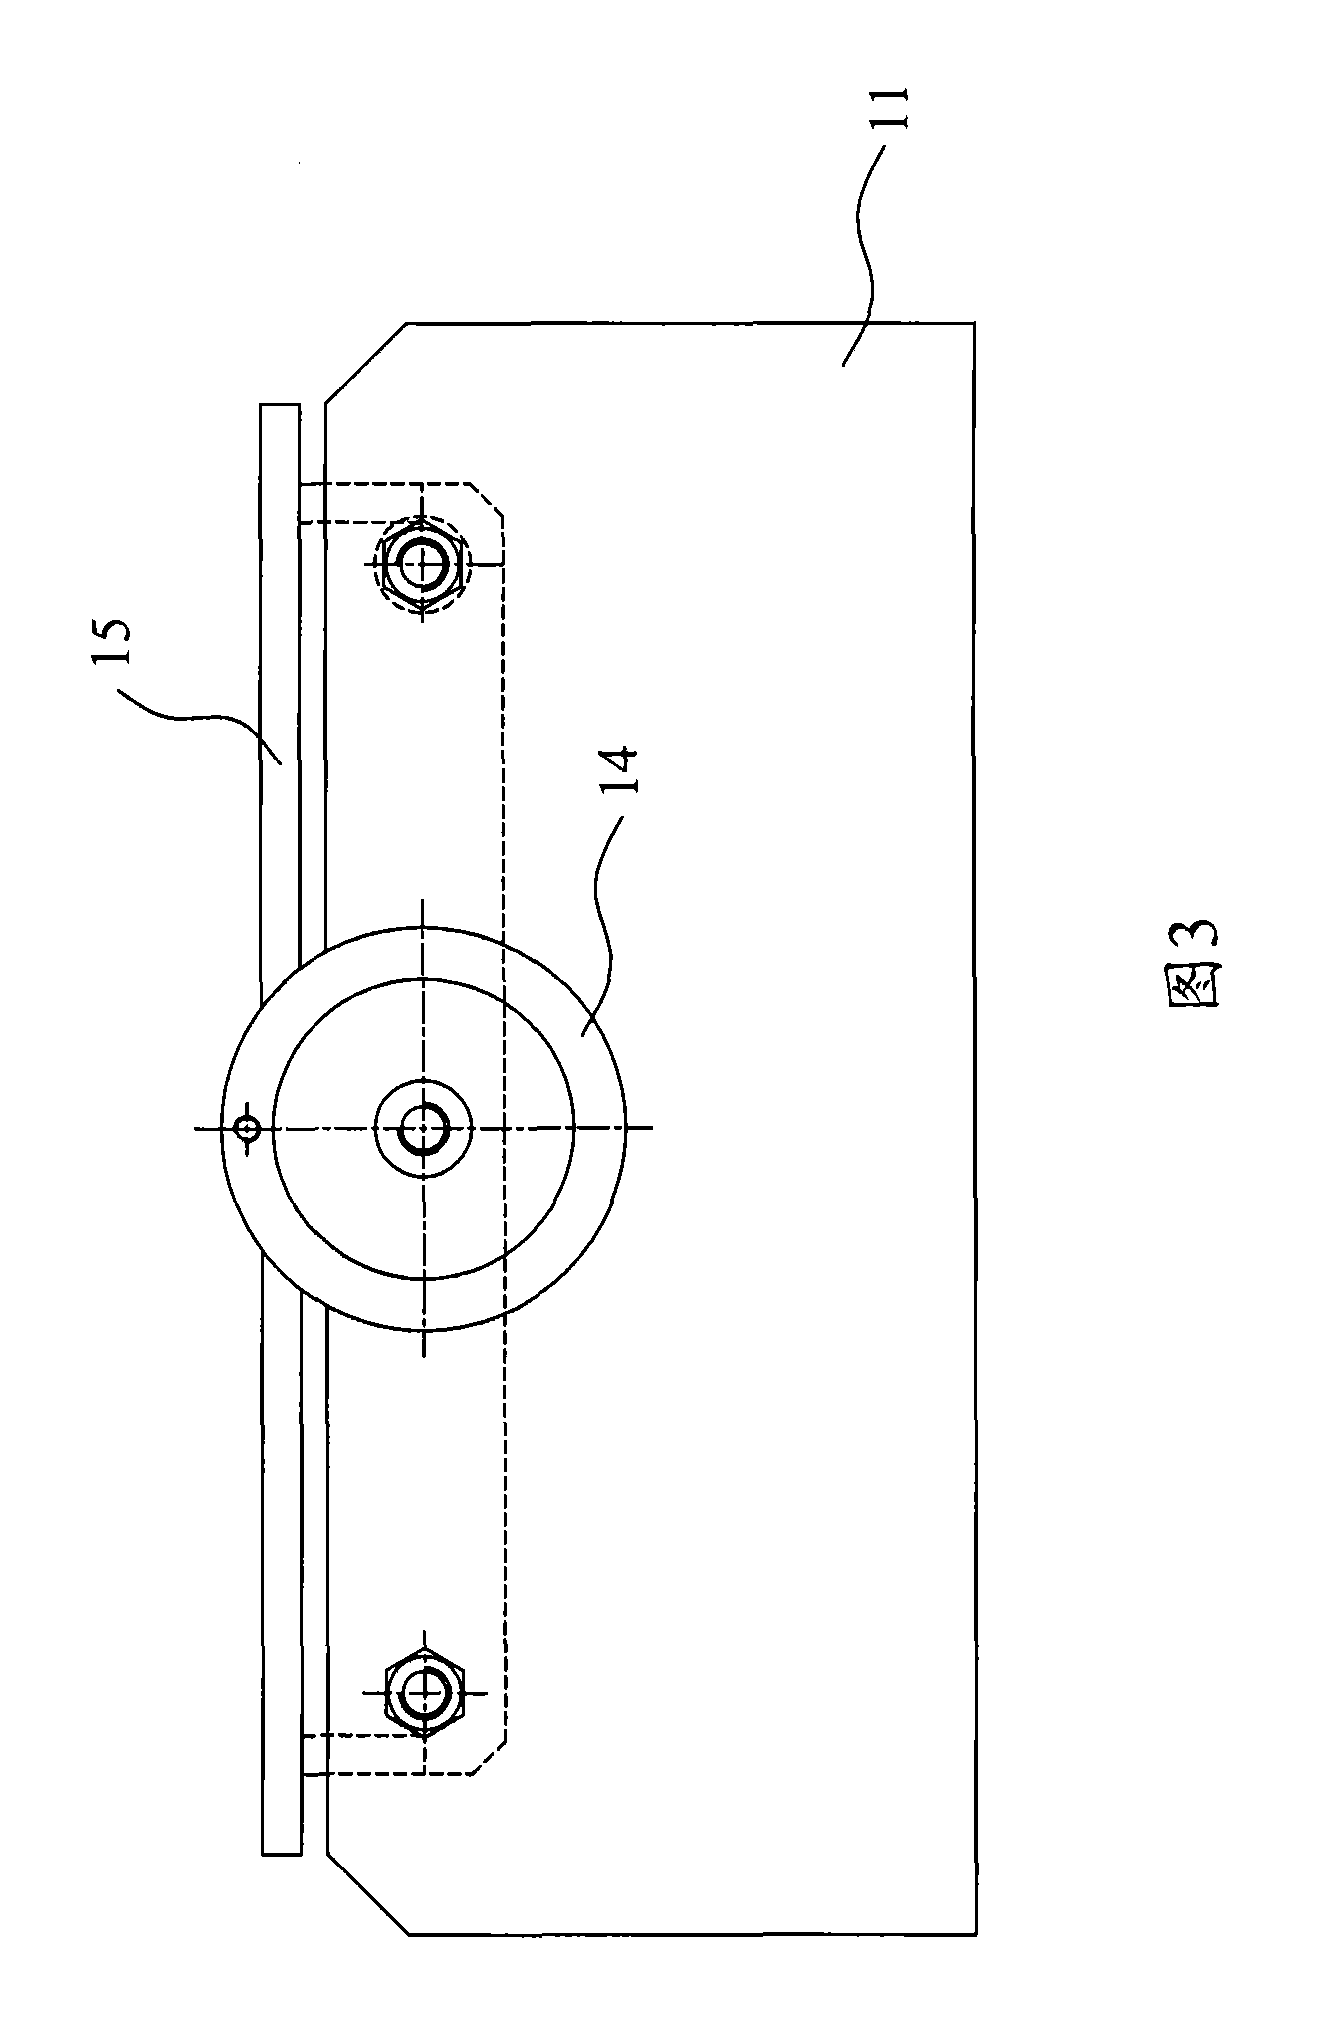 Endoscope detection apparatus used for detecting internal surface of stress cone